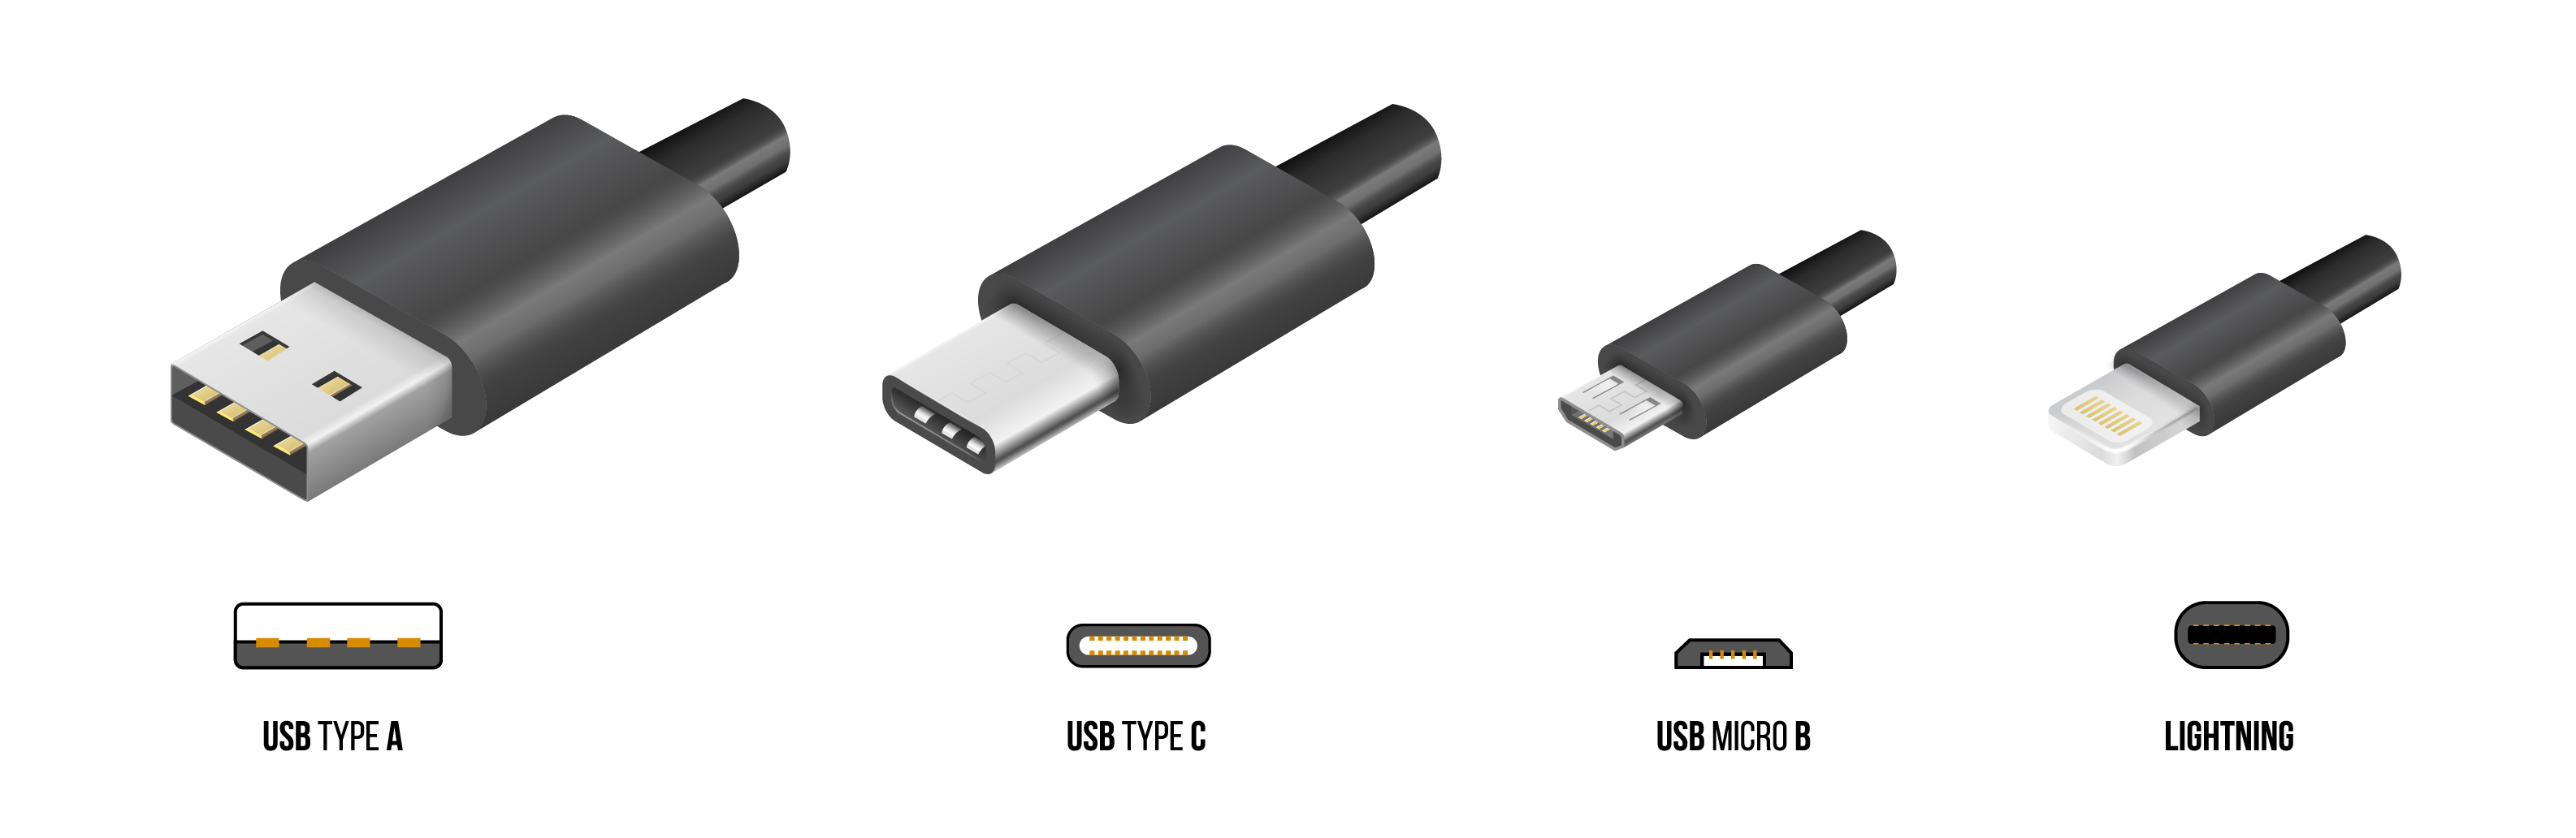 Various USB Connectors - USB type-A, USB type-C, Micro USB, and Lightning